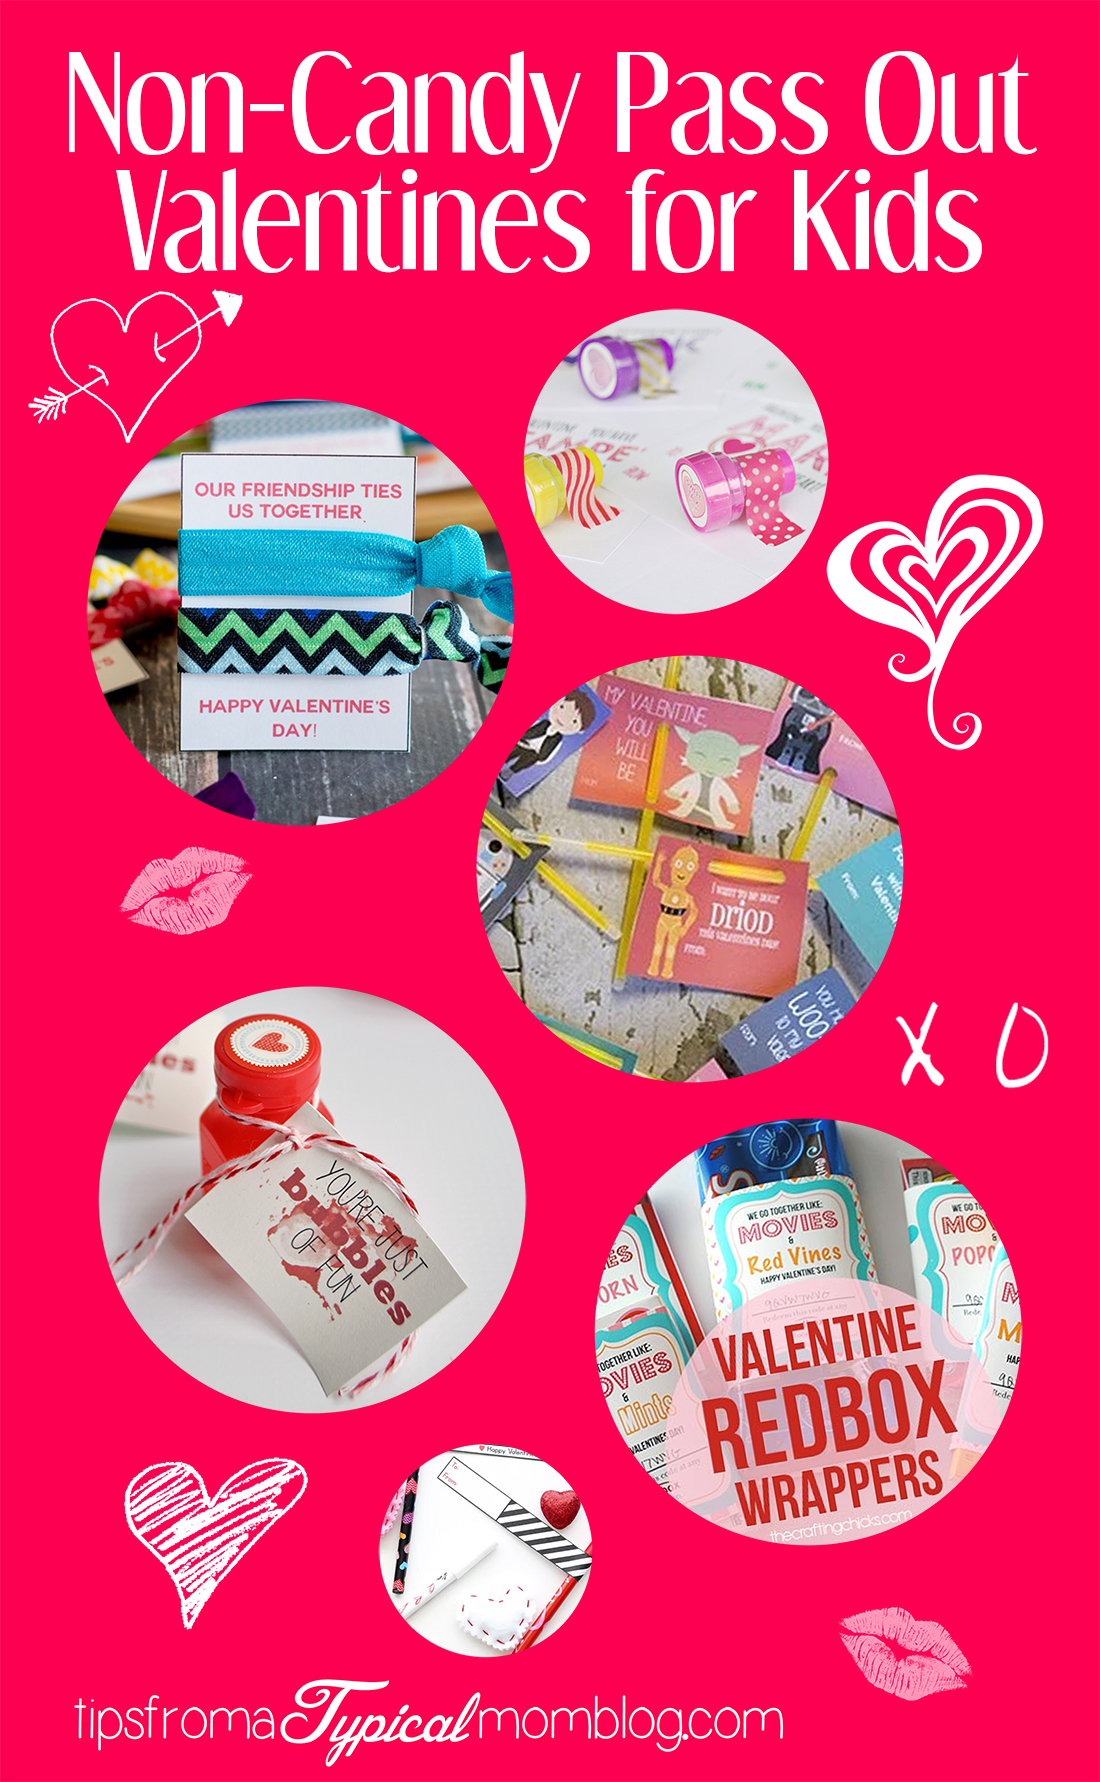 Free Printable Non-Candy Valentines for Kids